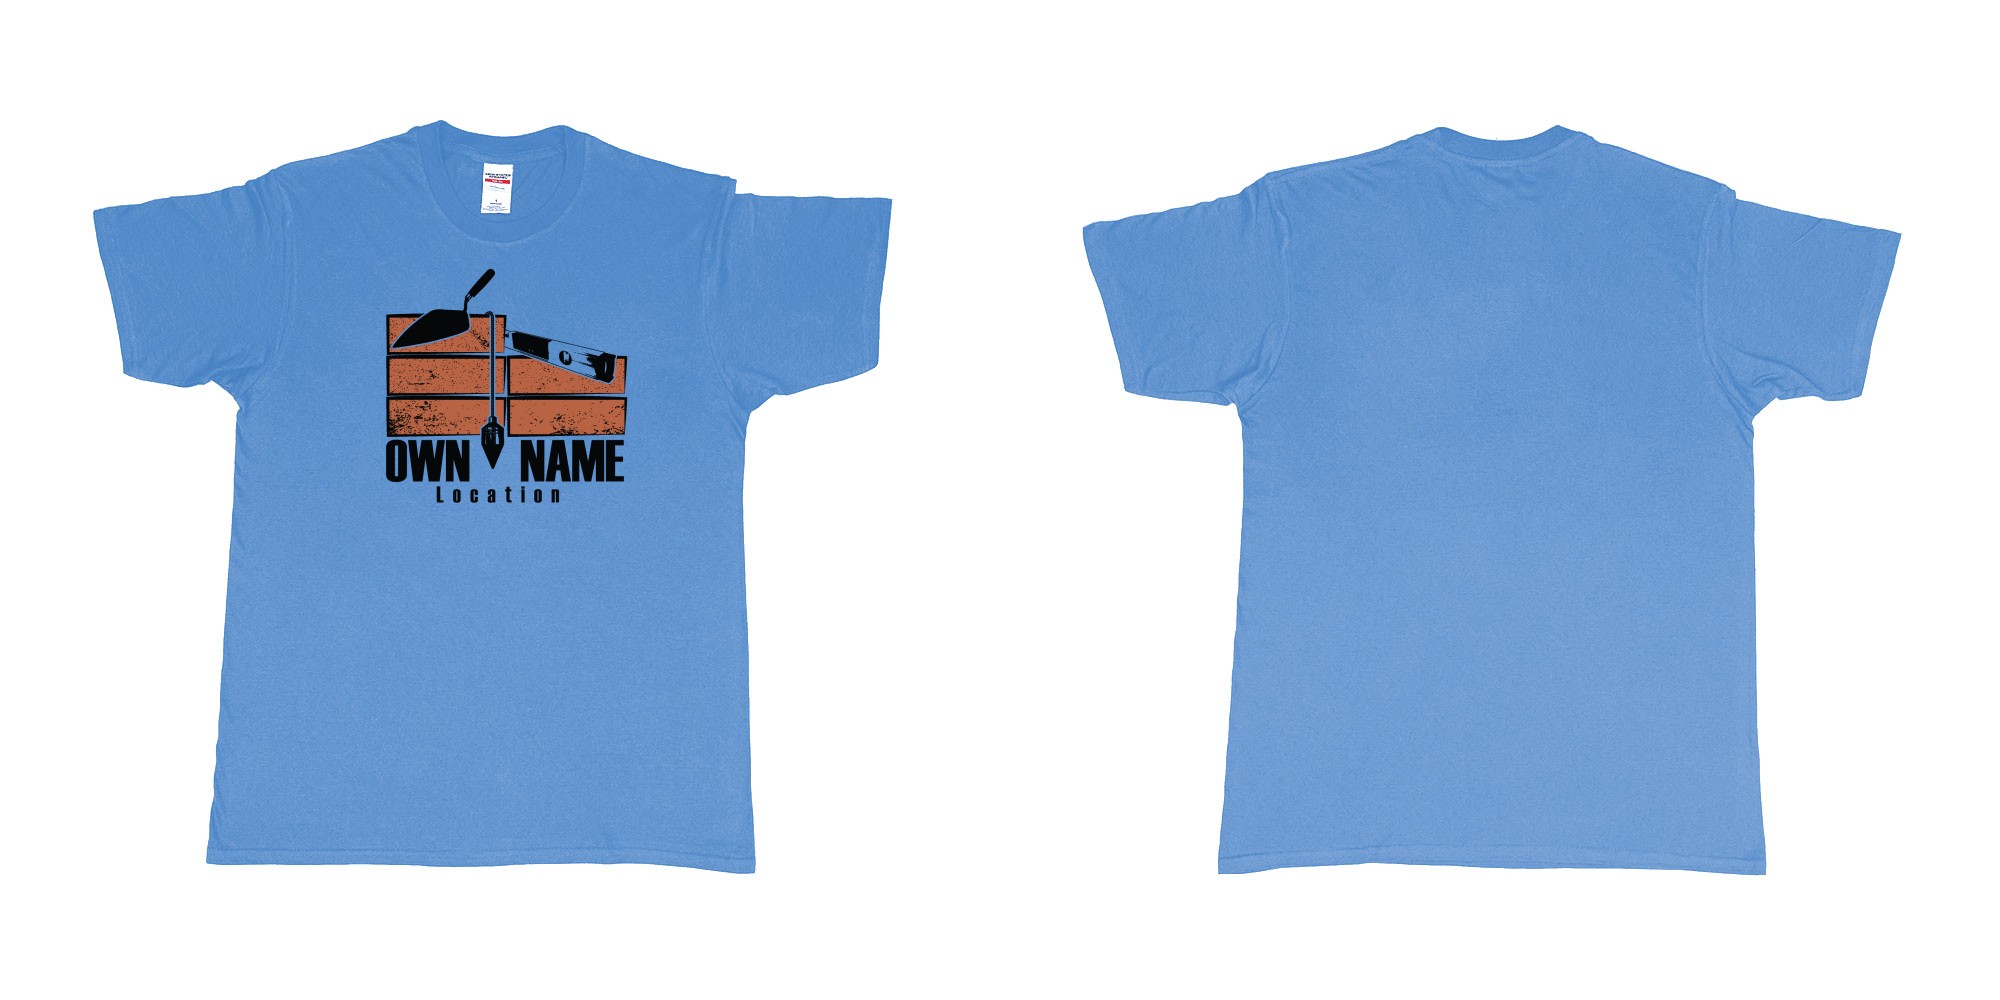 Custom tshirt design brick layer builder own custom company printing name location trowel in fabric color carolina-blue choice your own text made in Bali by The Pirate Way